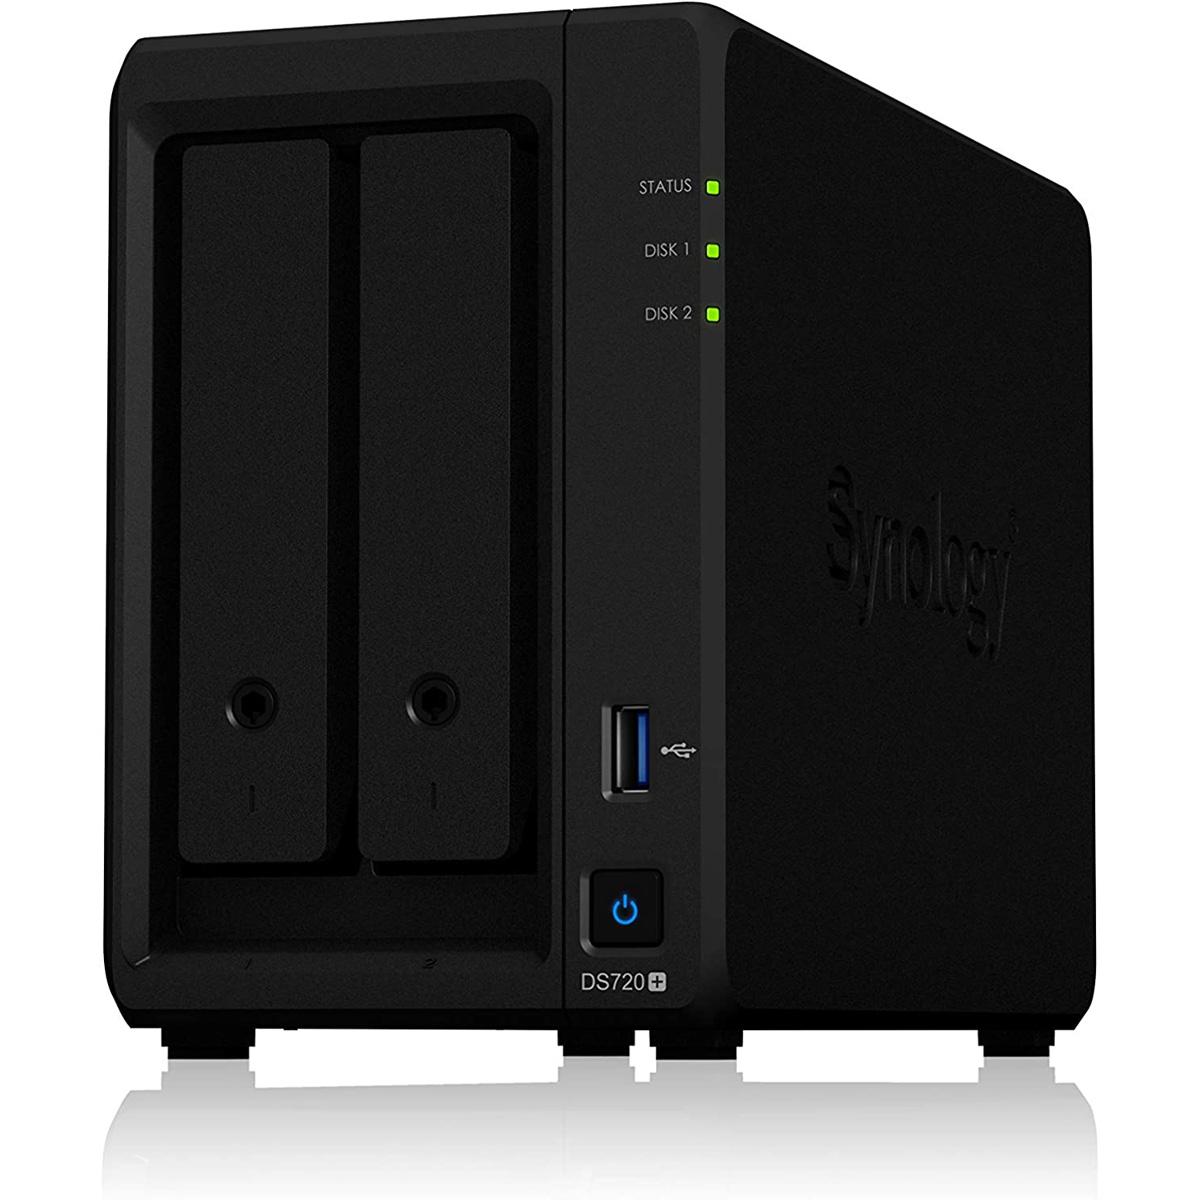 Synology DiskStation DS720 2-Bay NAS Enclosure for $319.99 Shipped